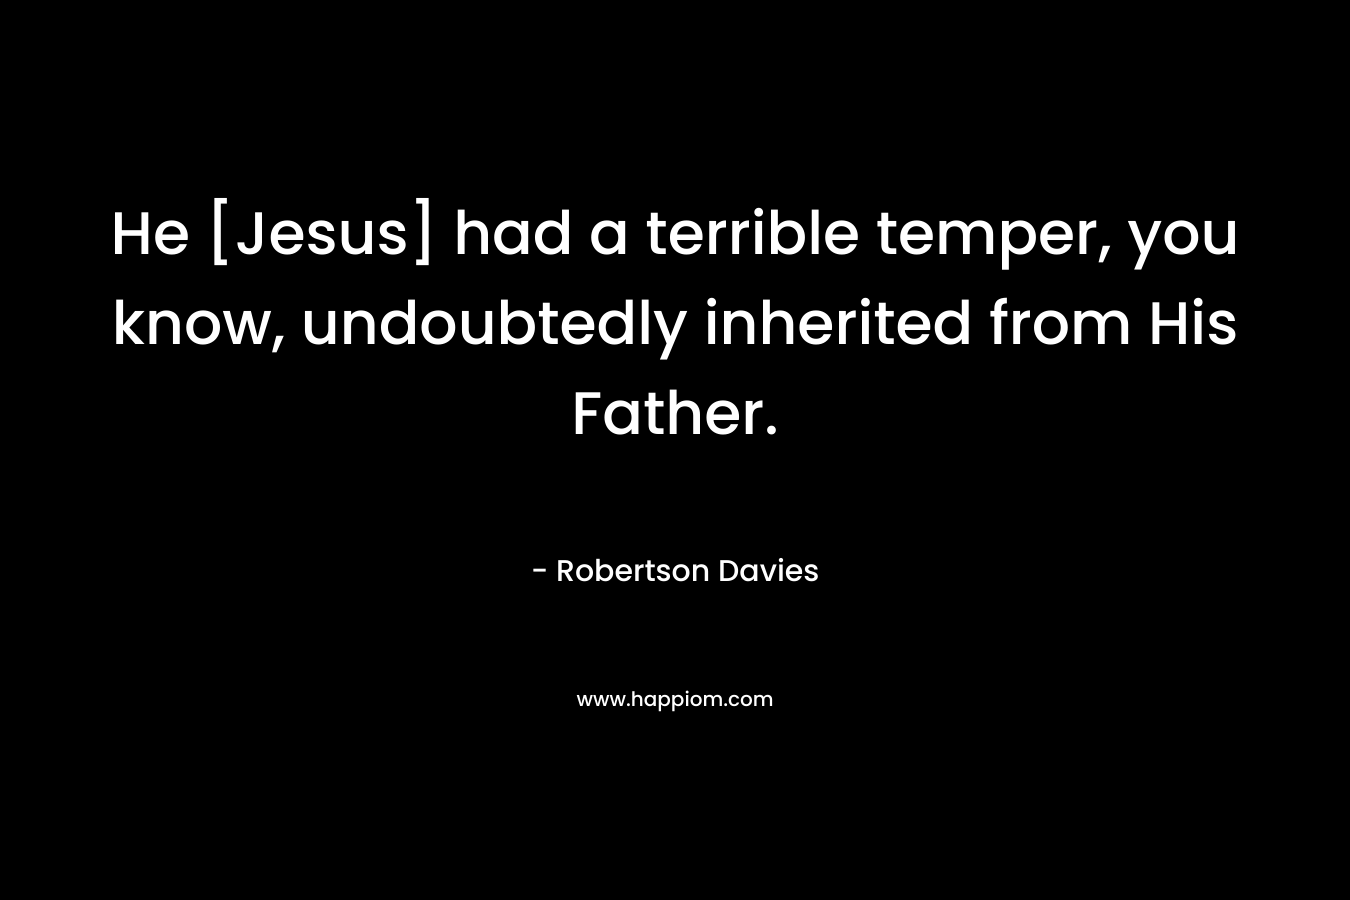 He [Jesus] had a terrible temper, you know, undoubtedly inherited from His Father. – Robertson Davies